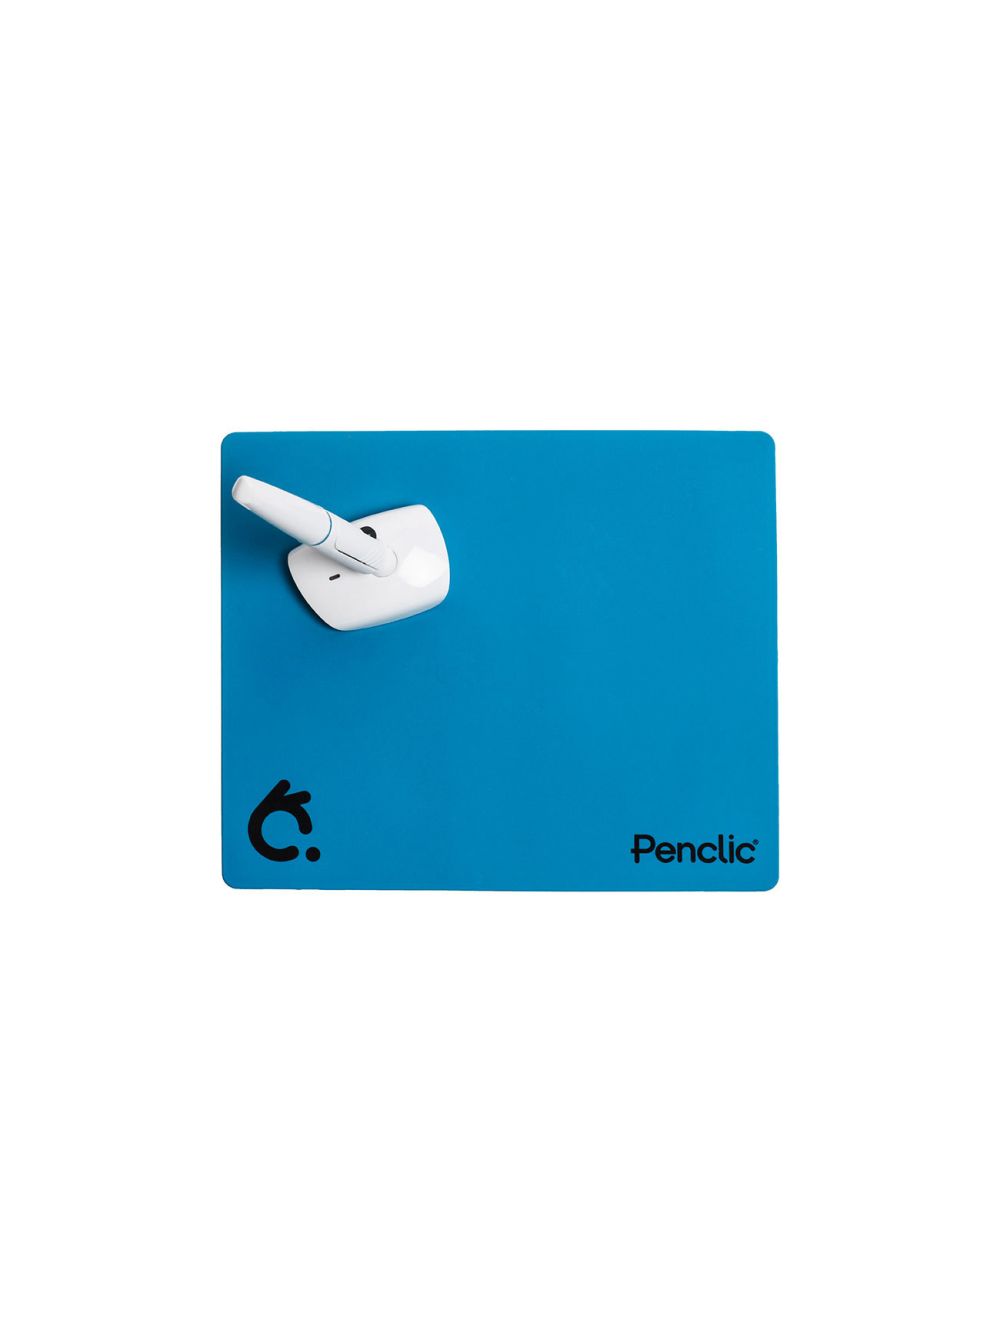 Mouse pad - Penclic M2 - Three colors 3